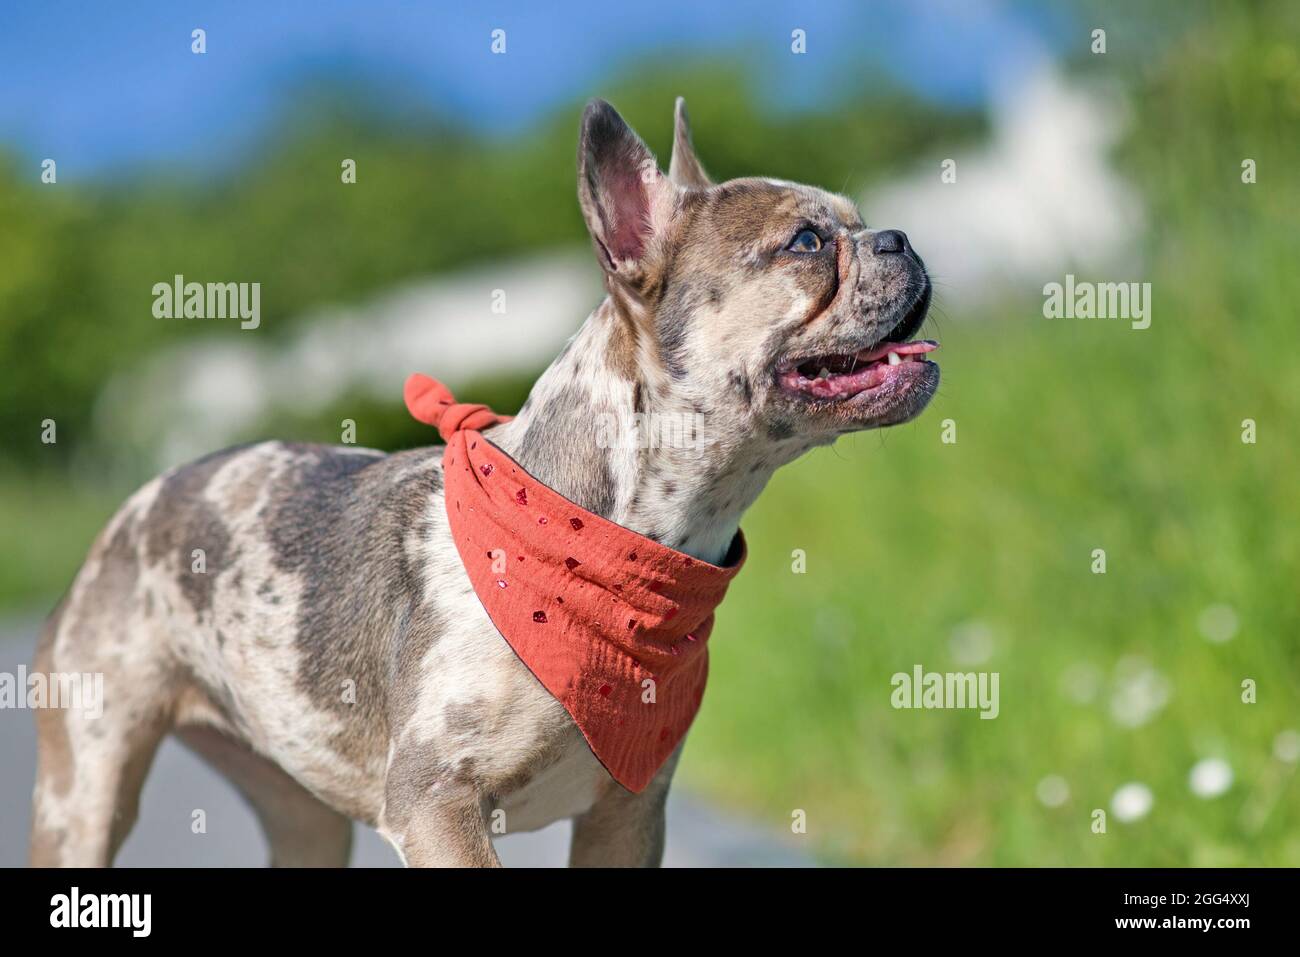 Young merle colored French Bulldog dog wearing red neckerchief Stock Photo